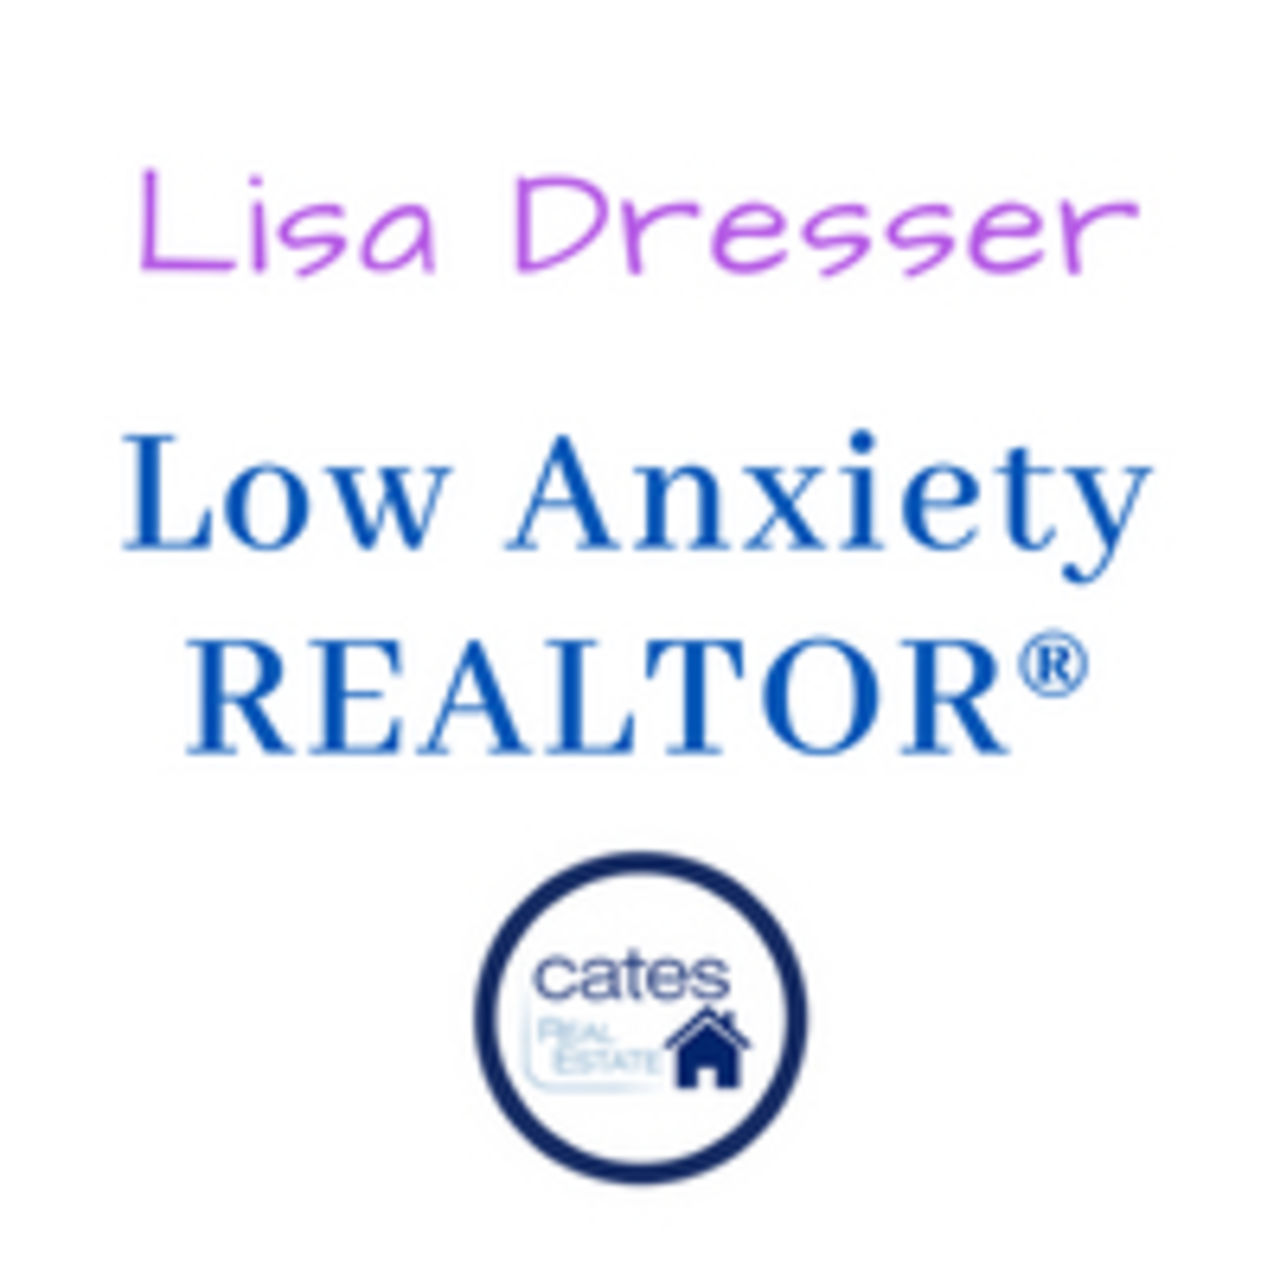 Sensible, Knowledgeable, Low Anxiety REALTOR: Lisa Dresser